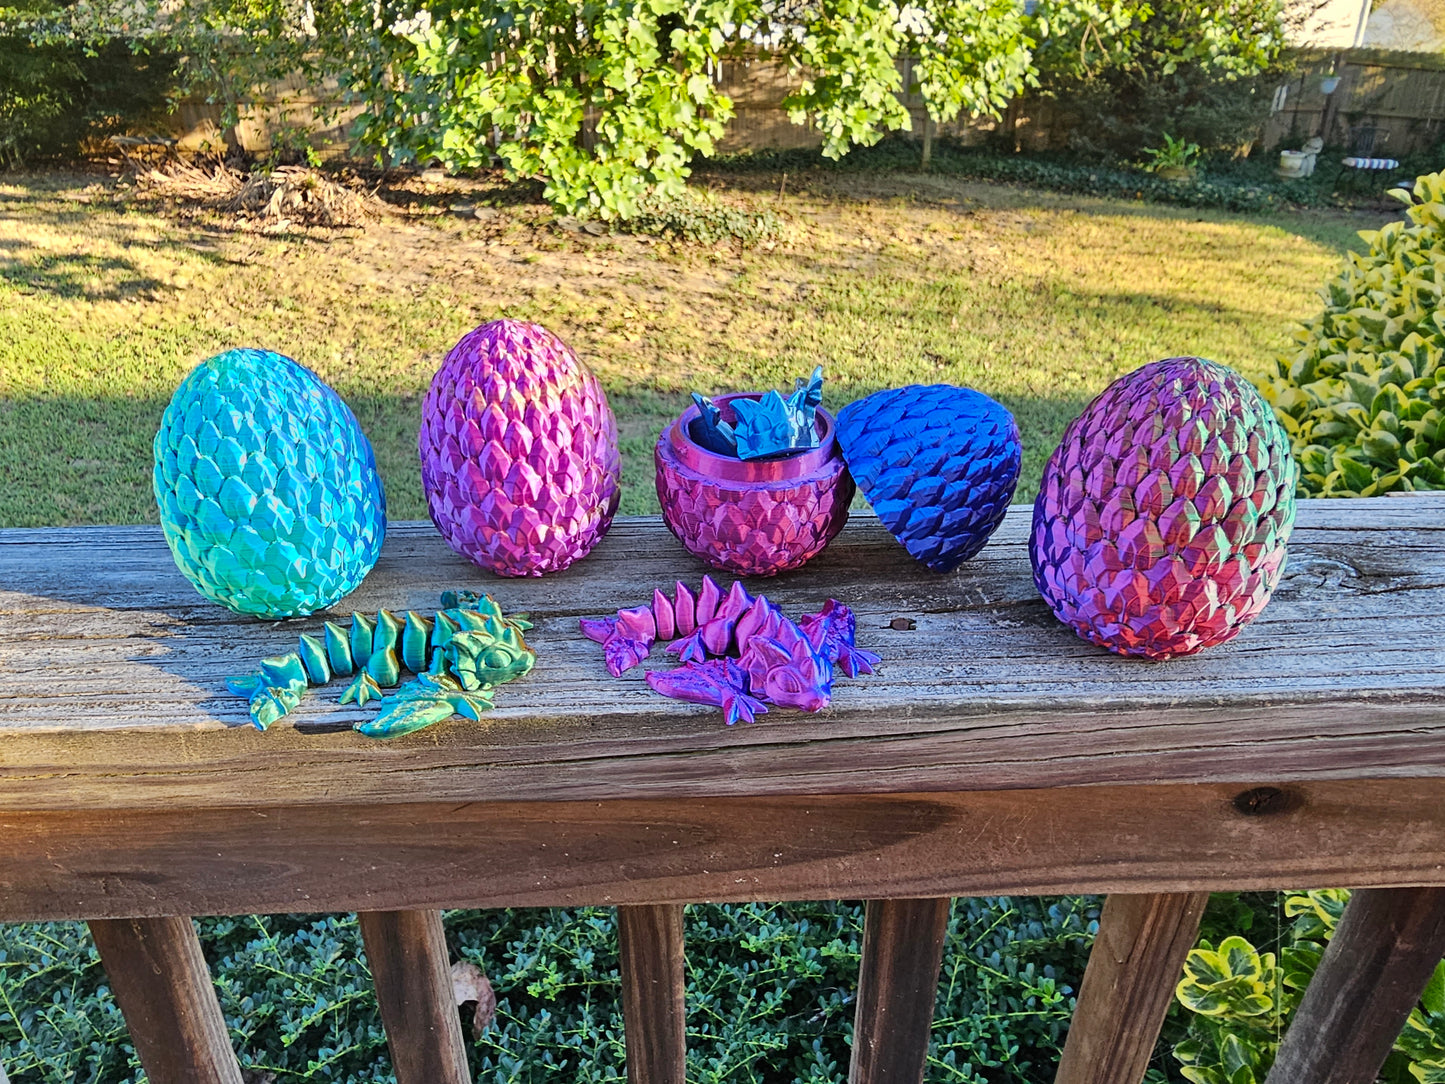 Dragon eggs with a surprise baby dragon inside!